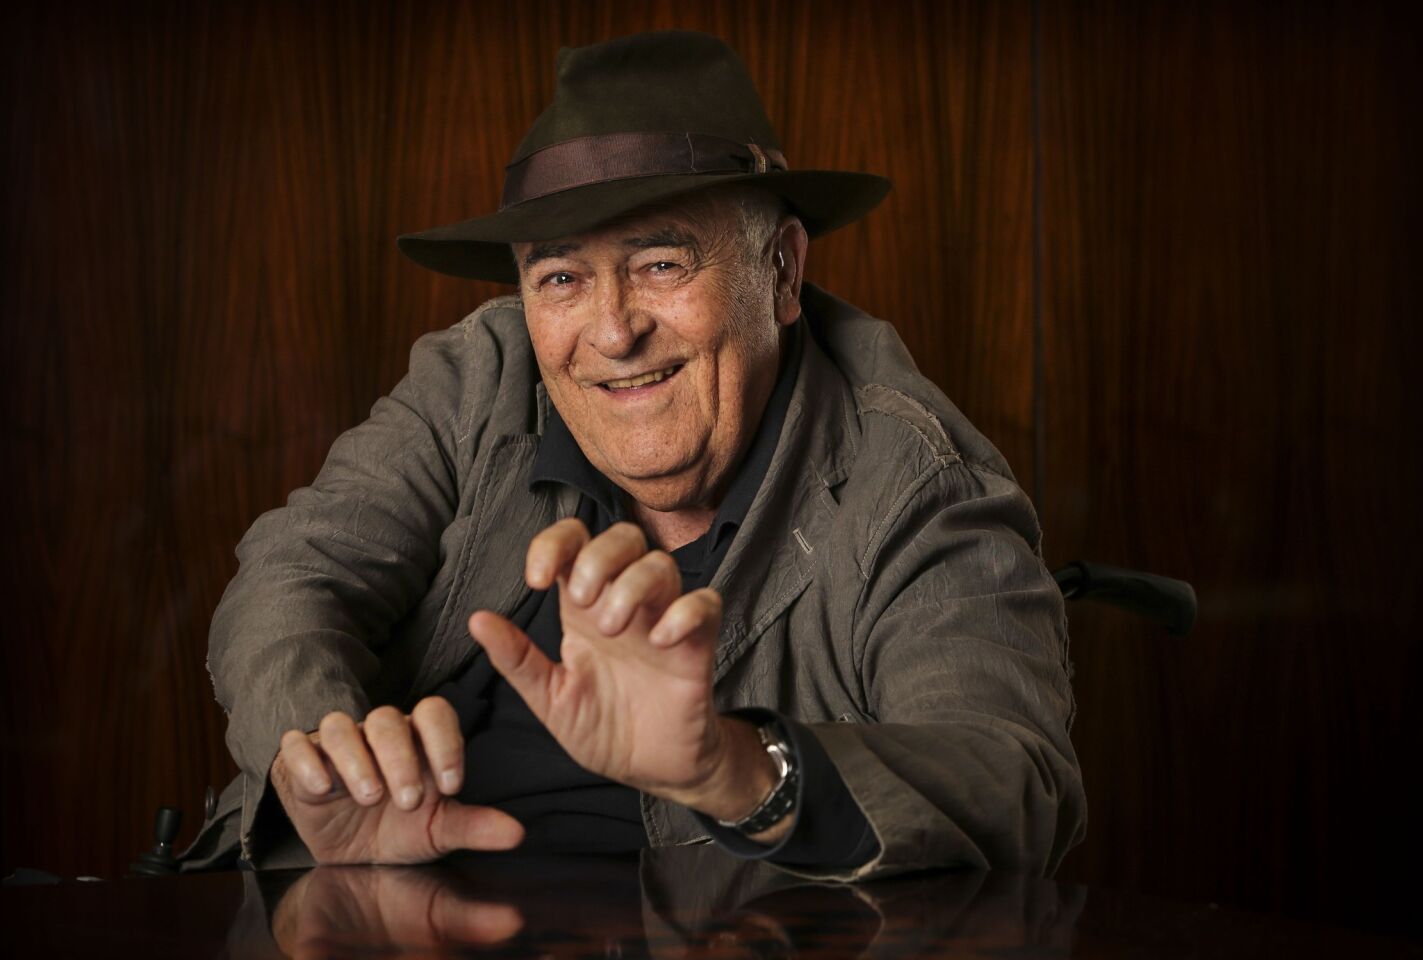 Oscar-winning director Bernardo Bertolucci, photographed at Mr. C Hotel, was in Los Angeles for AFI Fest, where a 3-D version of his Oscar-winning "The Last Emperor" was screened Nov. 10. He was later presented with the Cinema Italian Style's 2014 CIS Award.